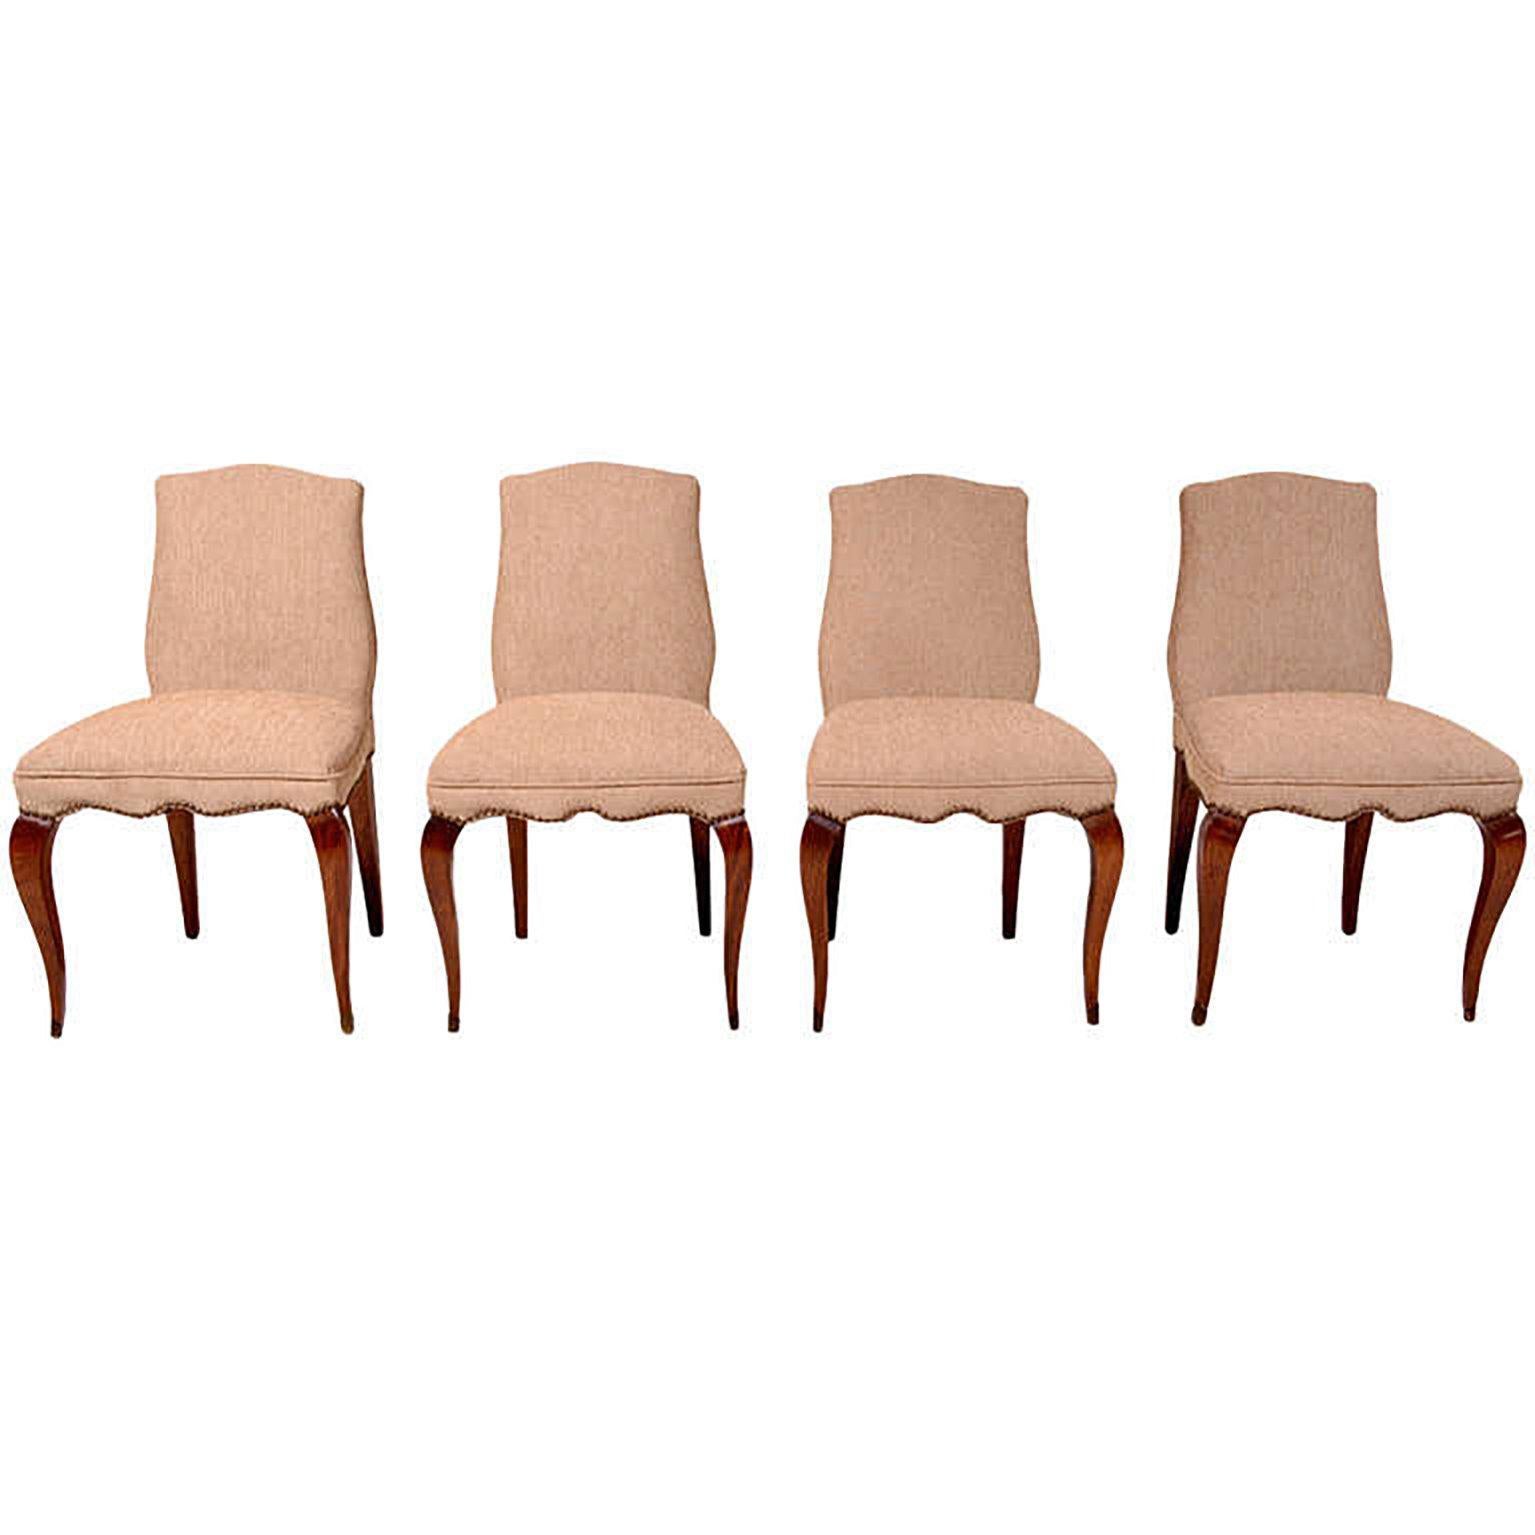 For your consideration a set of four dining chairs designed by Arturo Pani.

Sculptural legs constructed with solid mahogany wood. The front legs have sculptural brass tips.

Dimensions:
22